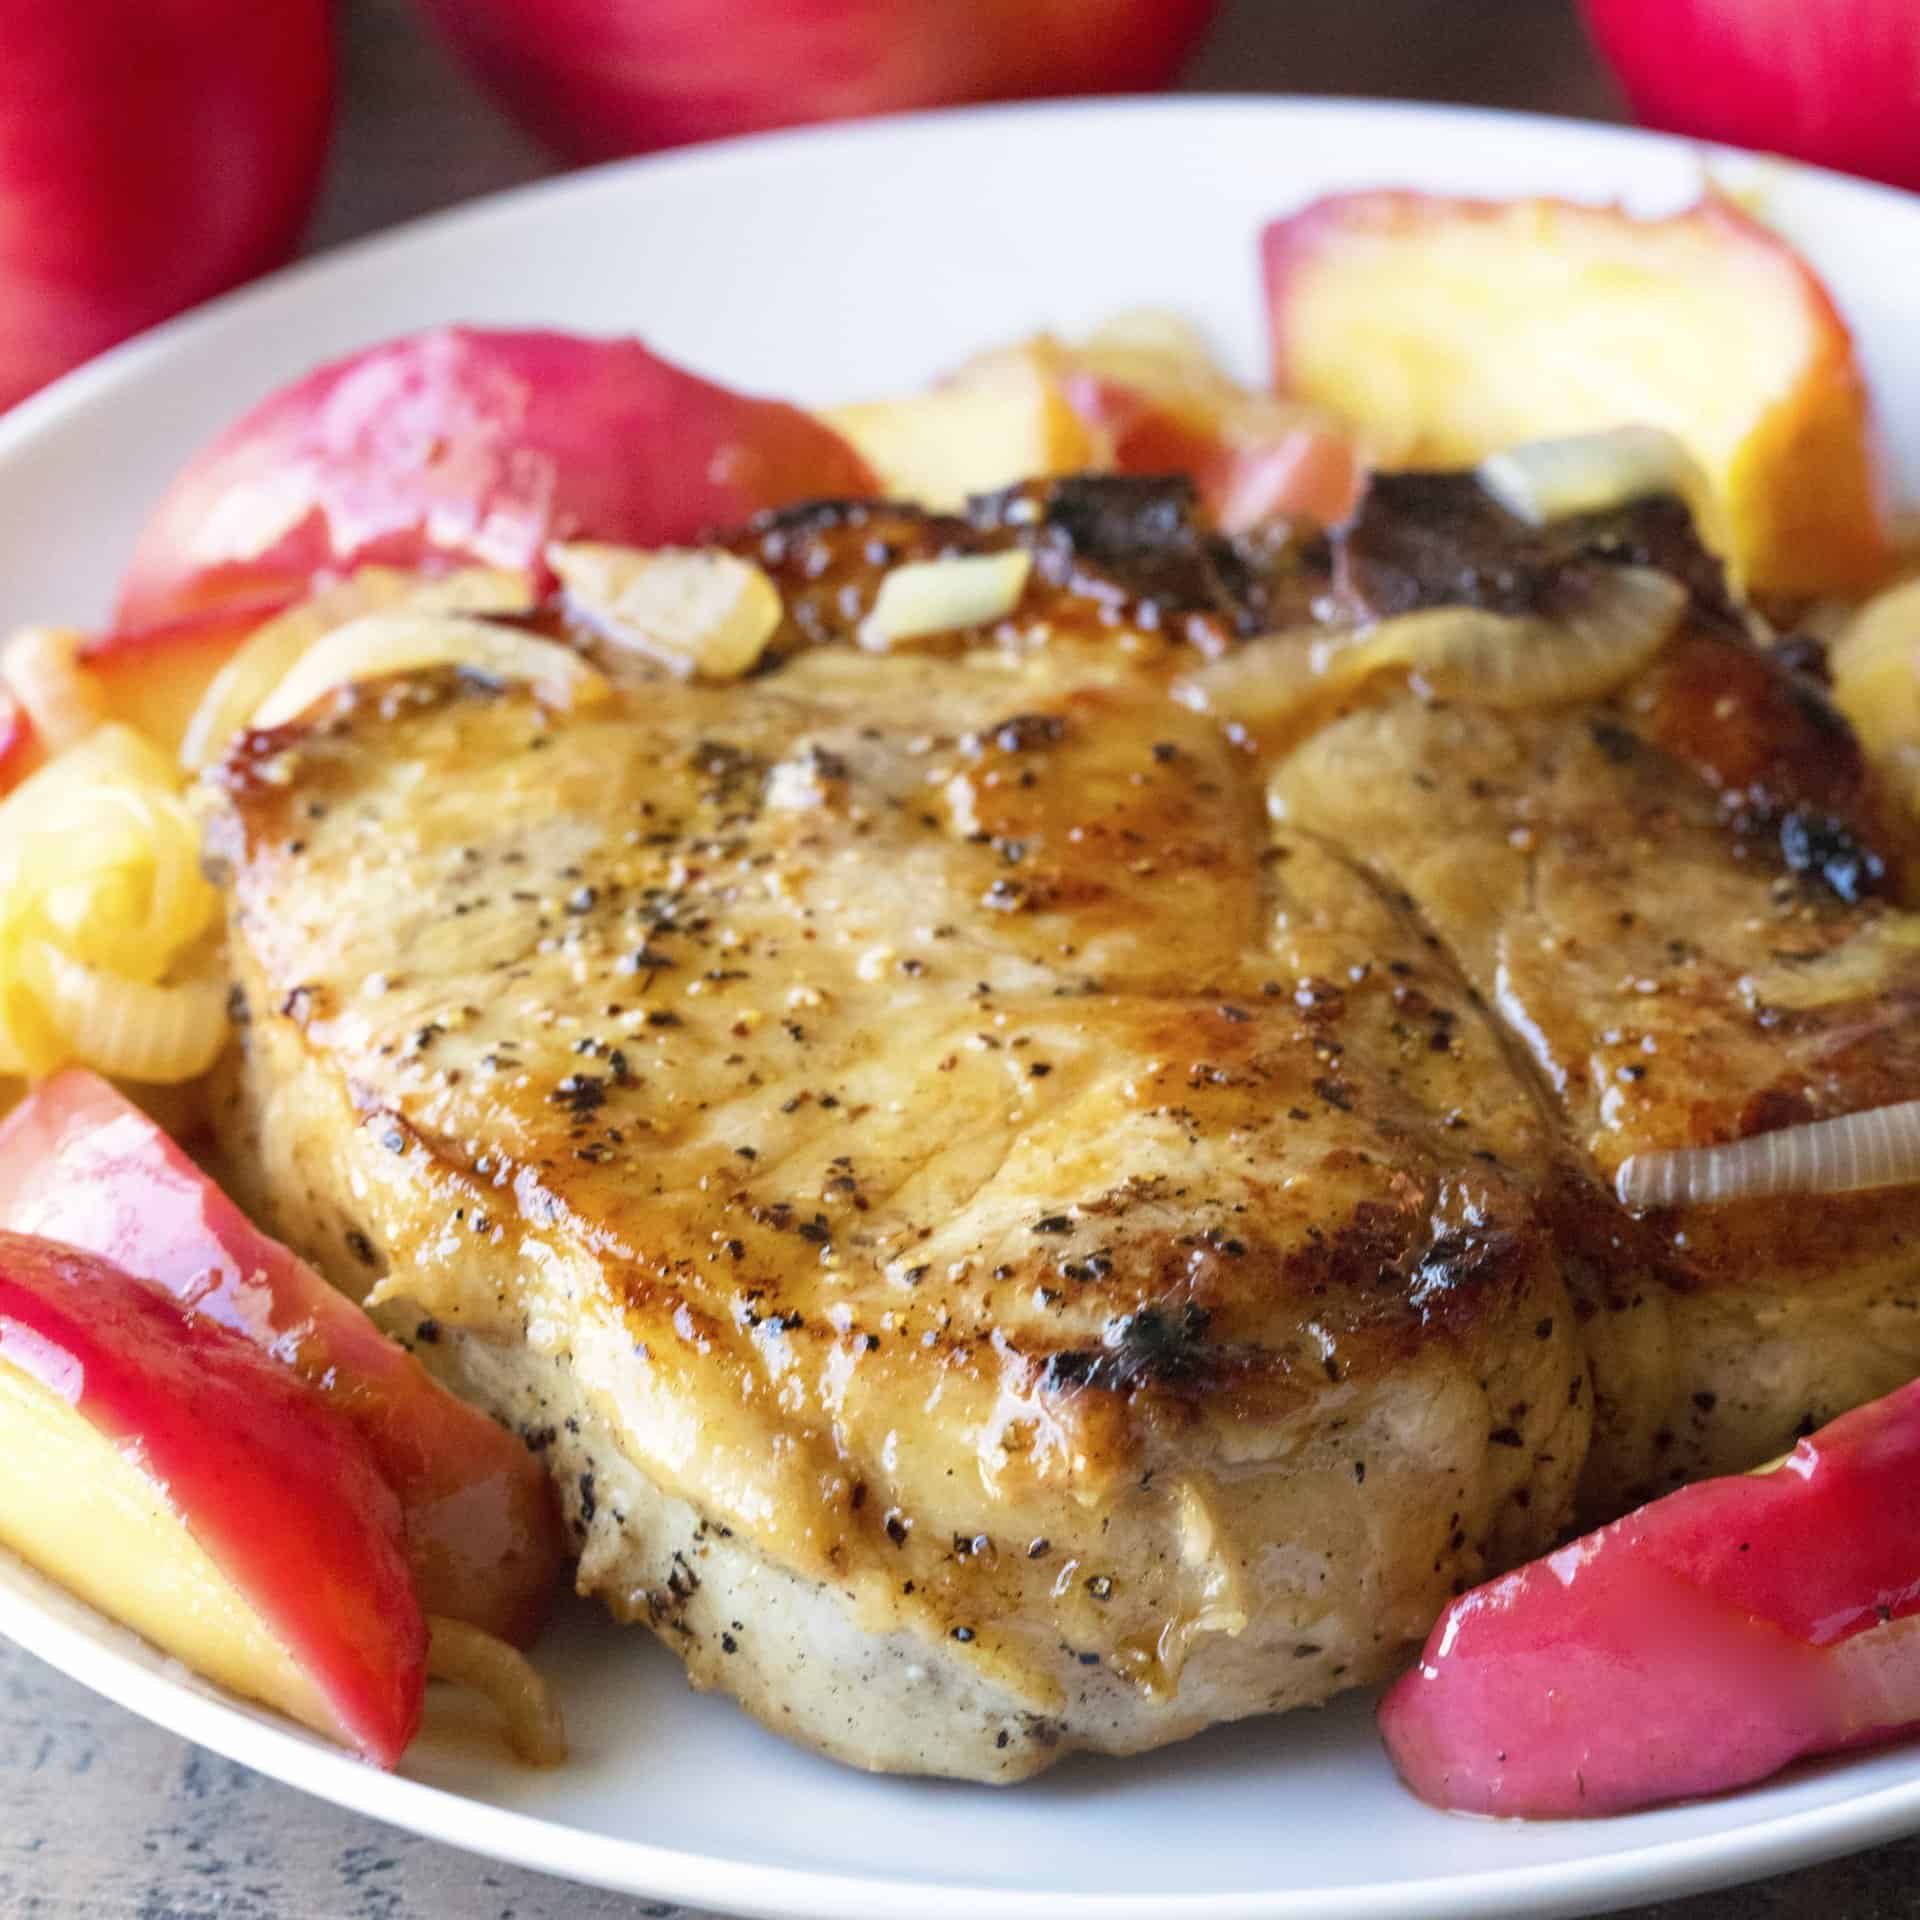 Delicious Apple Pork Chops with Caramelized Onions will quickly become a family favorite. This classic combination makes a perfect fall or winter dinner.